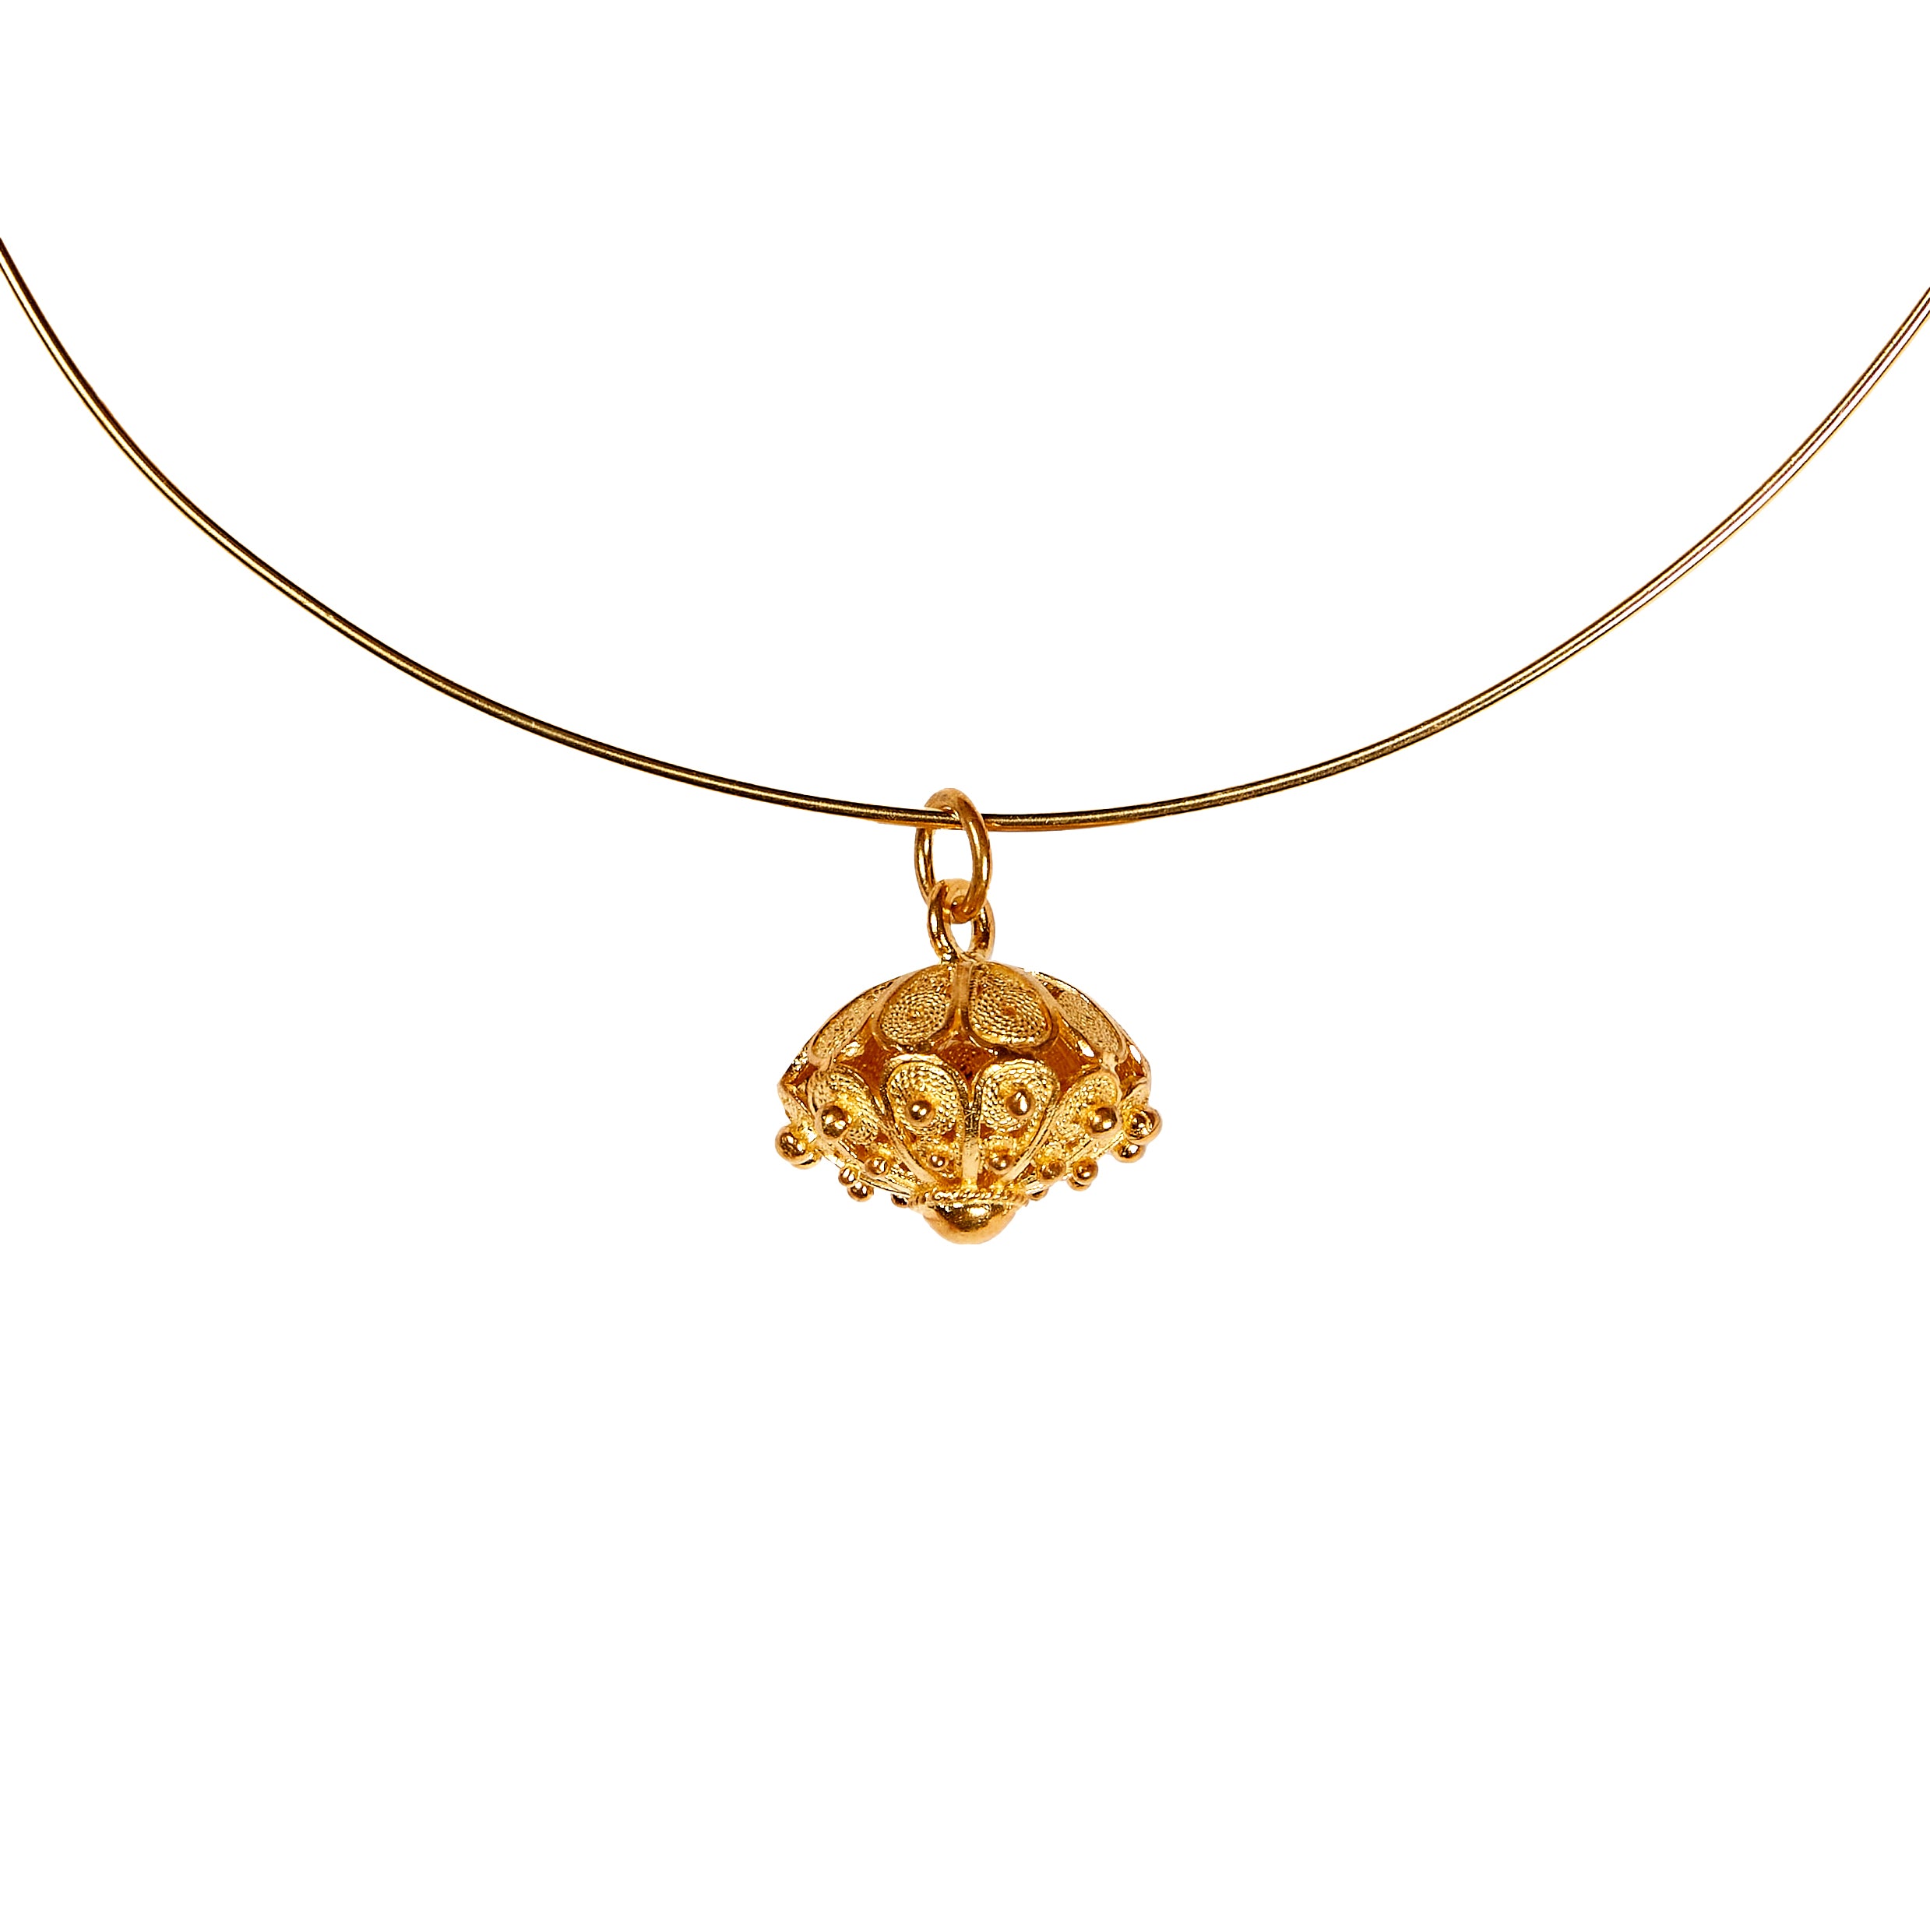 LUCY Chain - Filigree - 925/1000 gold plated silver MEA AYAYA